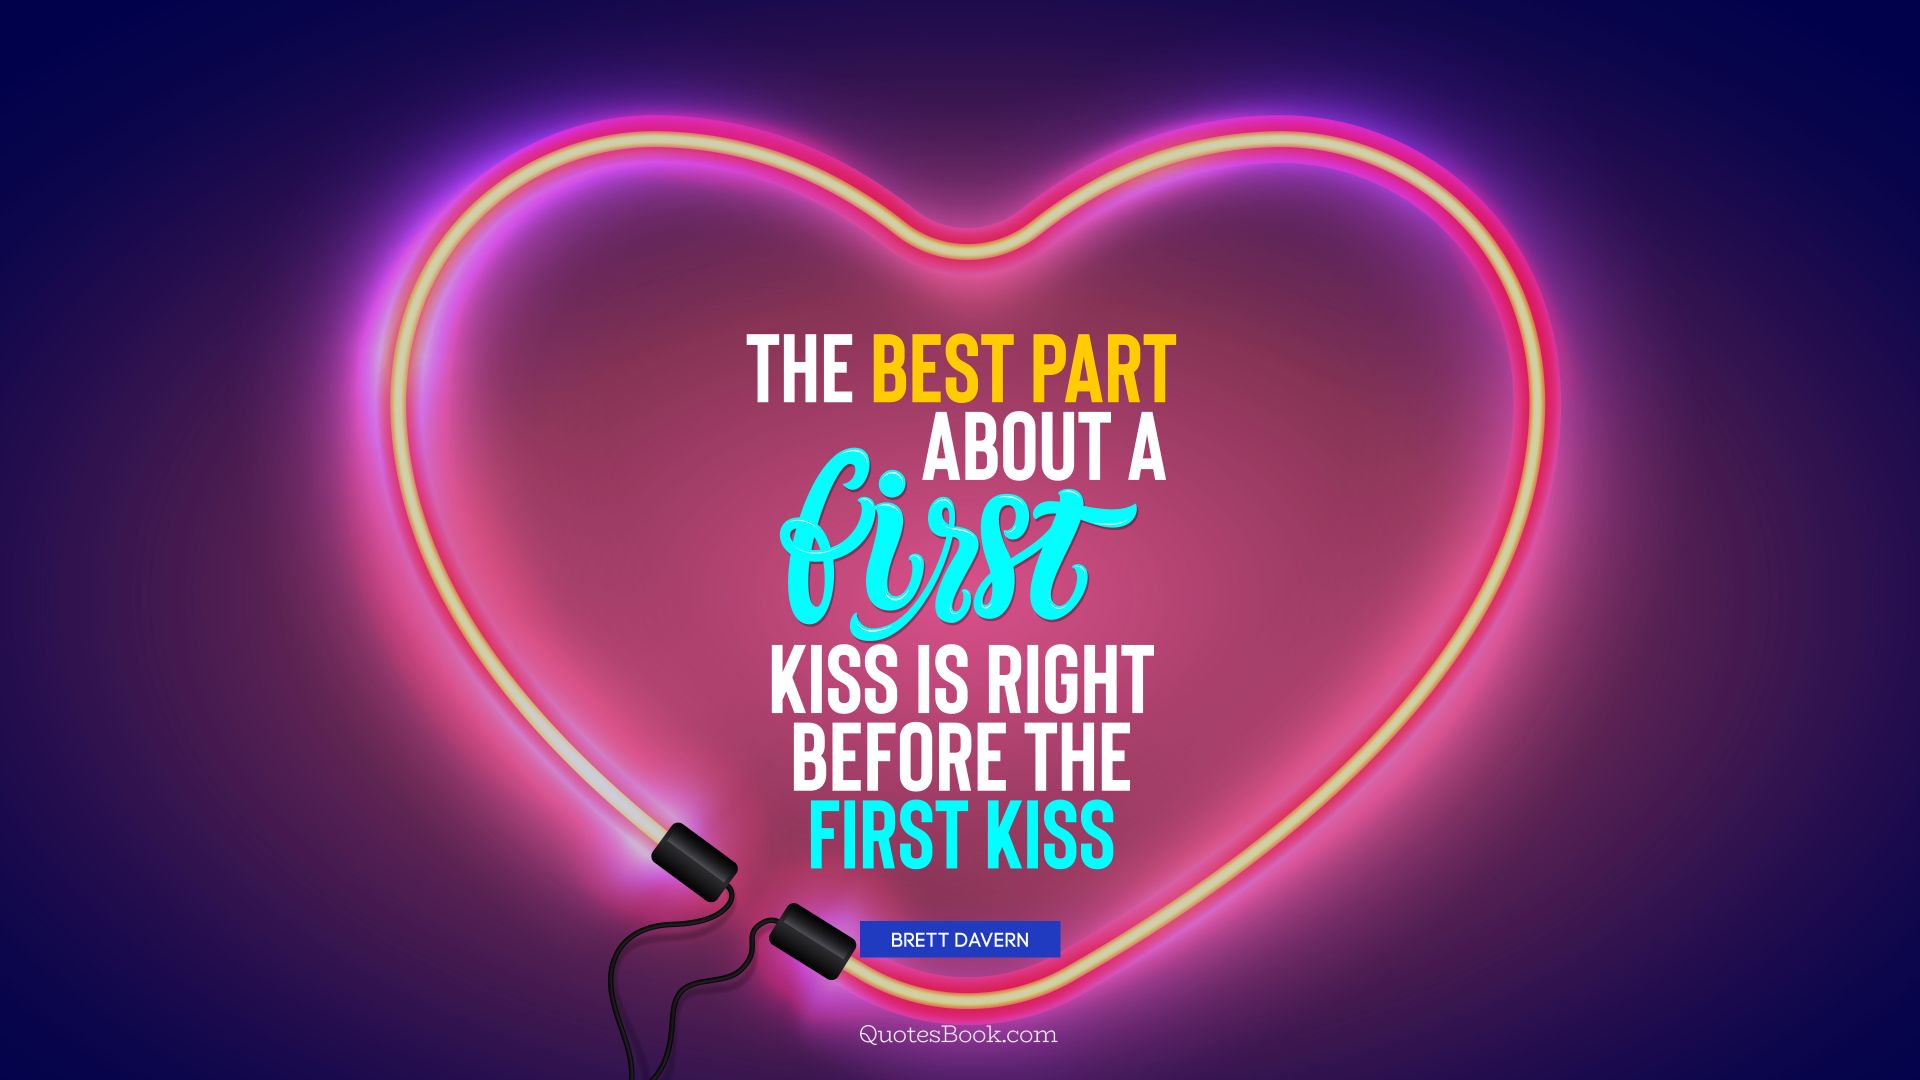 The best part about a first kiss is right before the first kiss. - Quote by Brett Davern